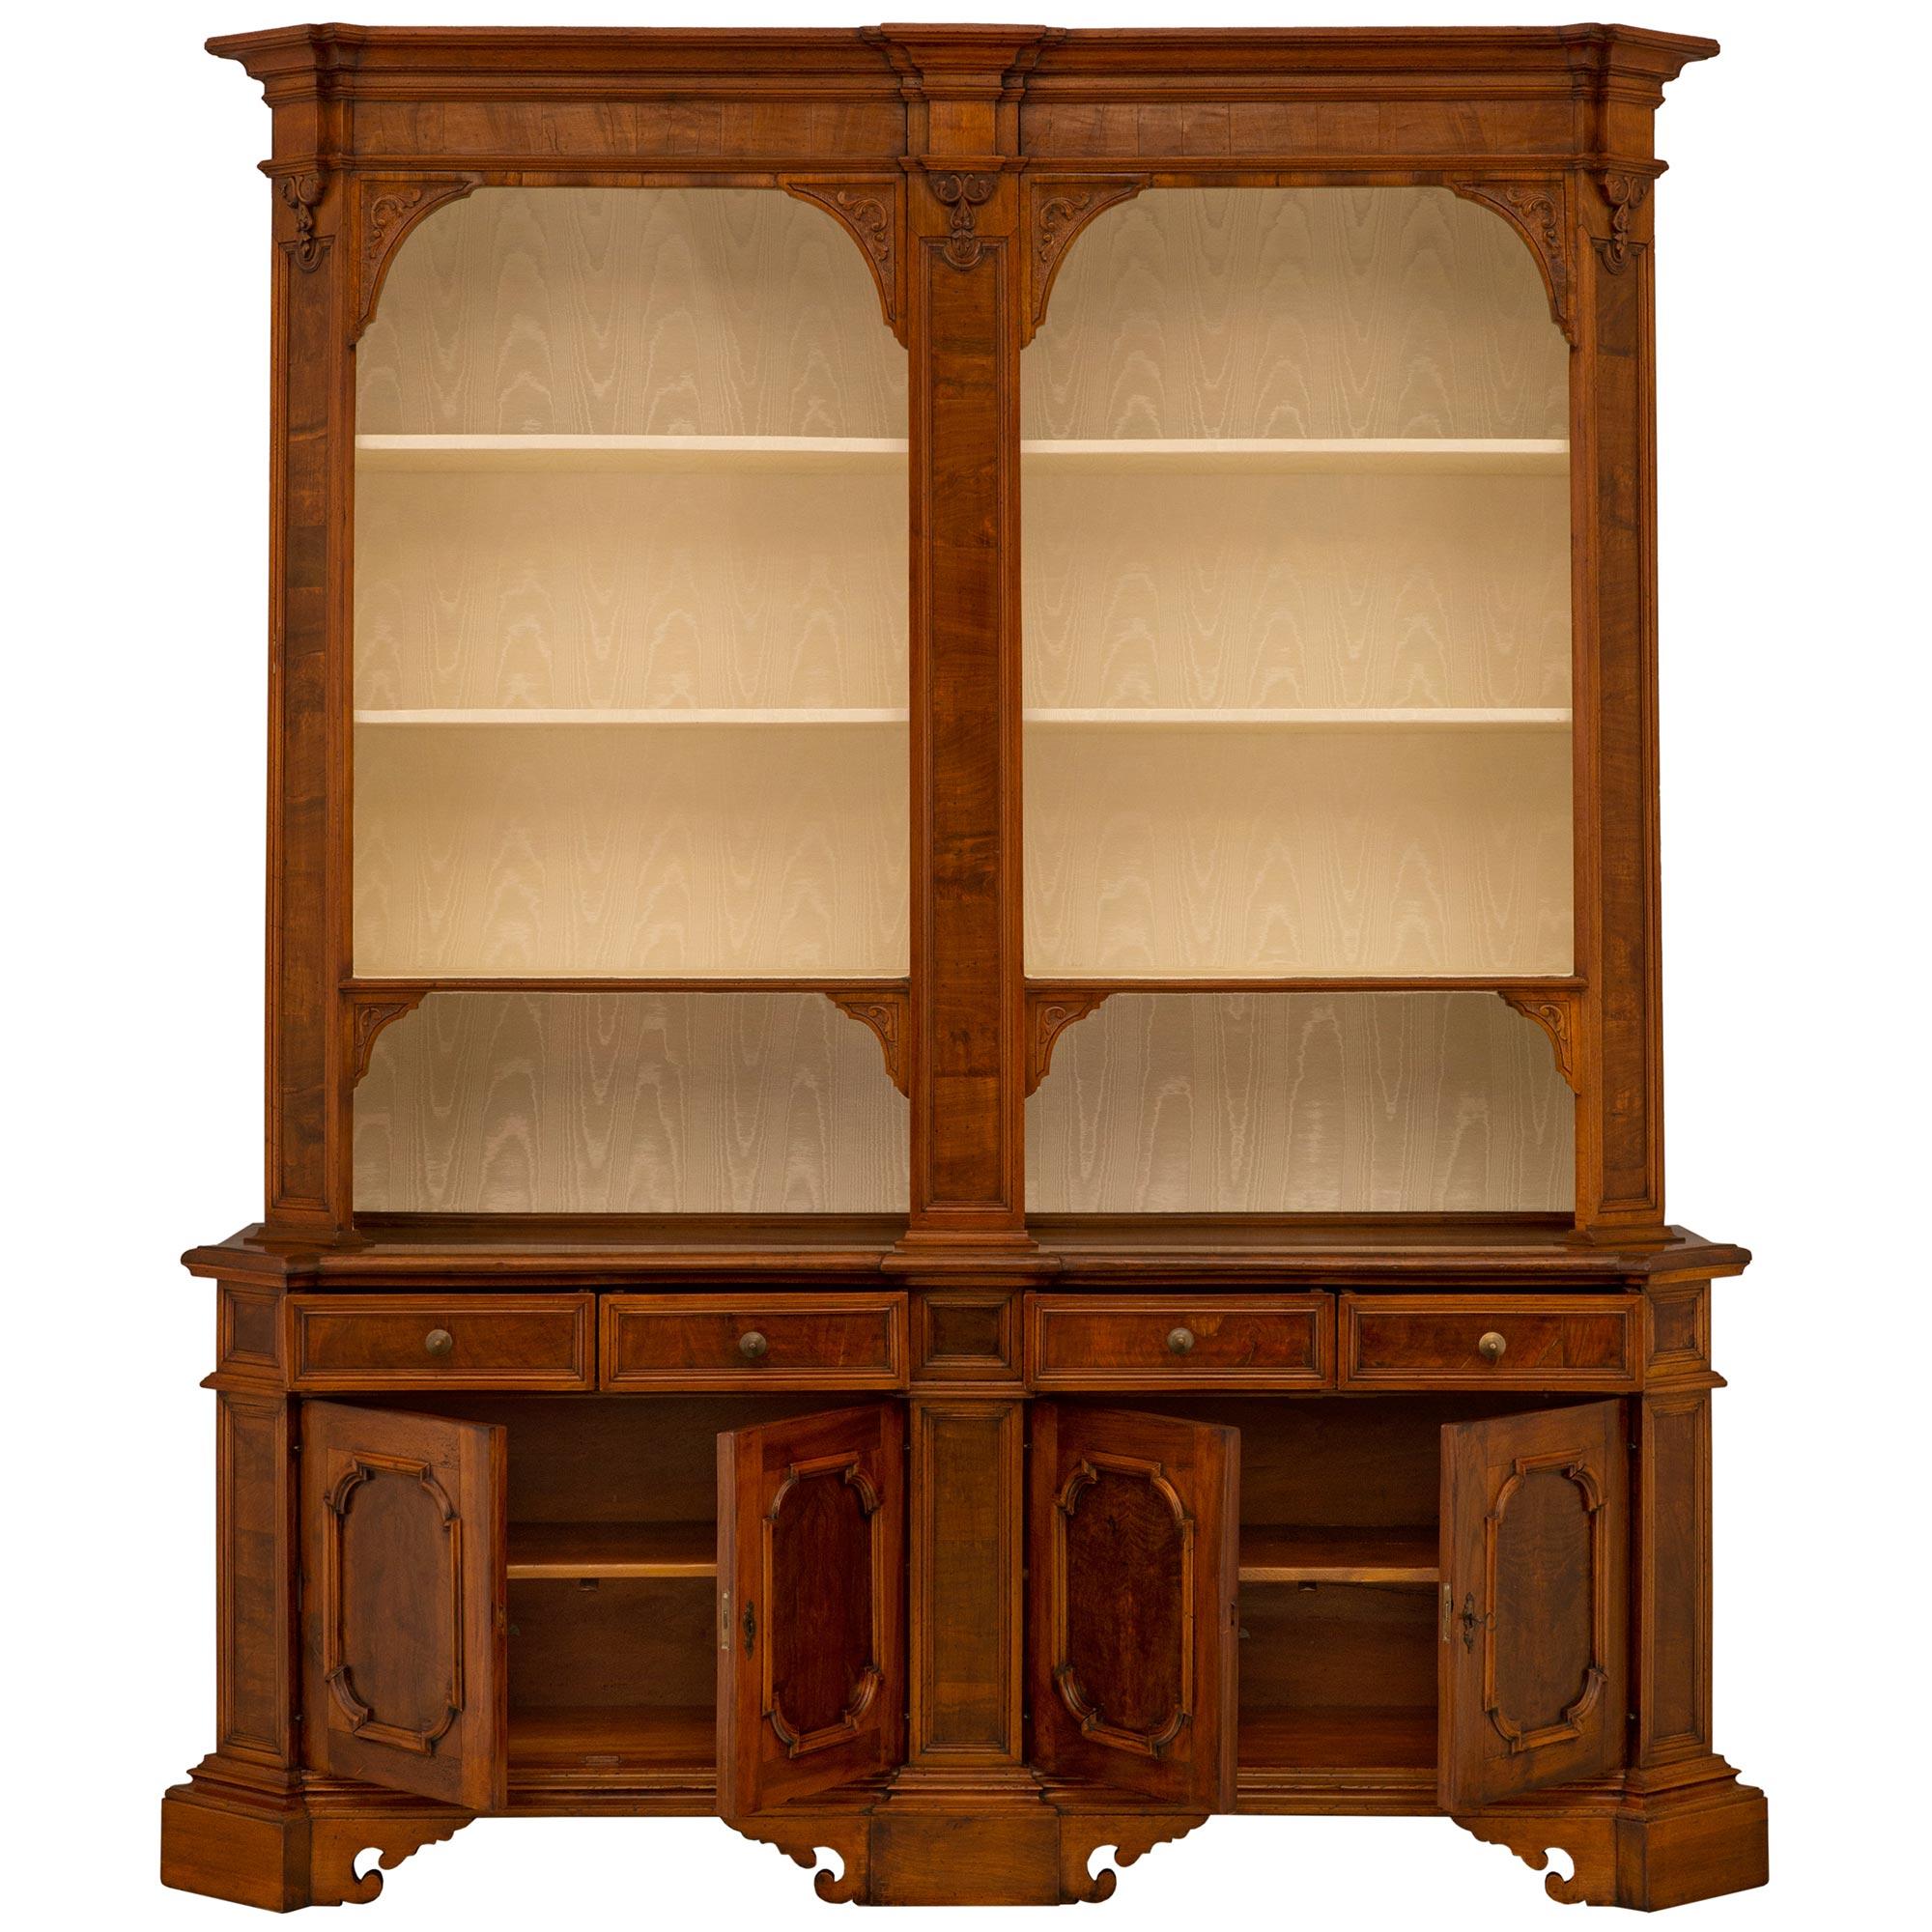 An Italian 18th century Baroque st. walnut cabinet In Good Condition For Sale In West Palm Beach, FL